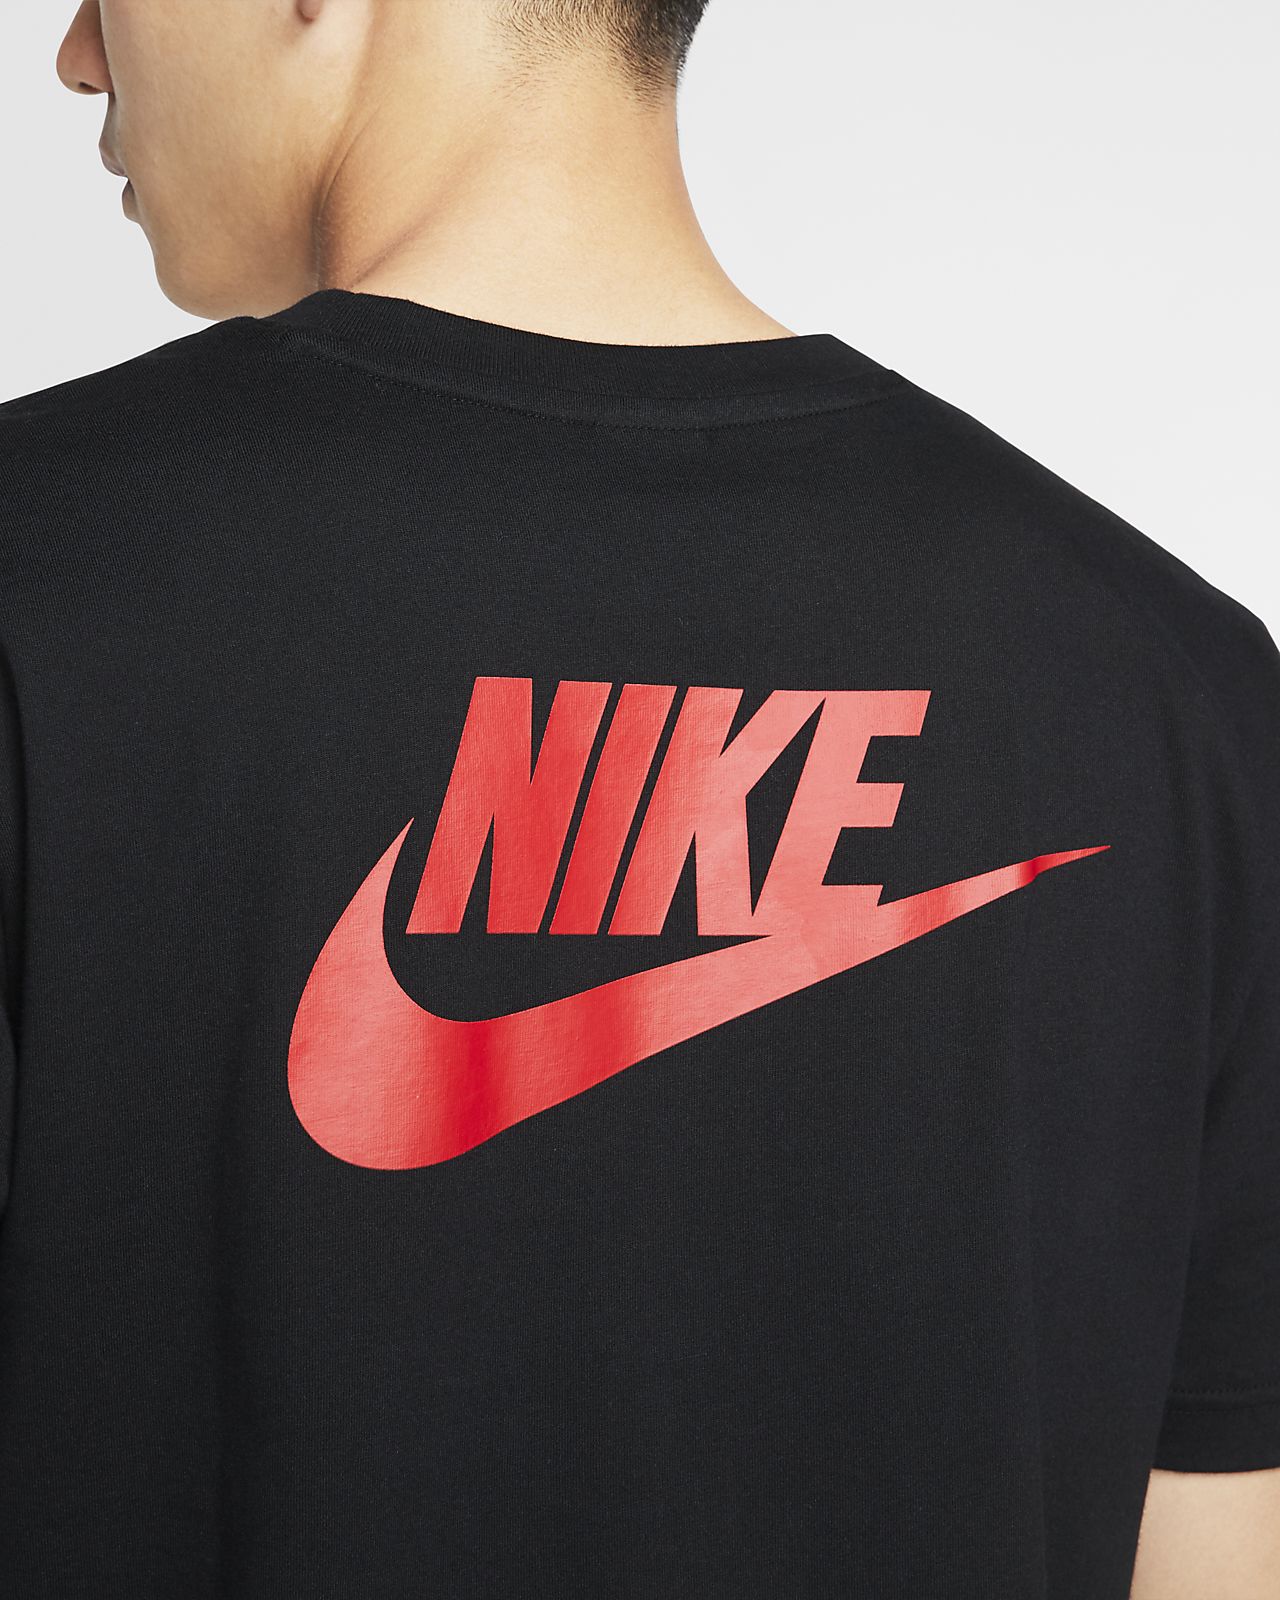 red black and grey nike shirt